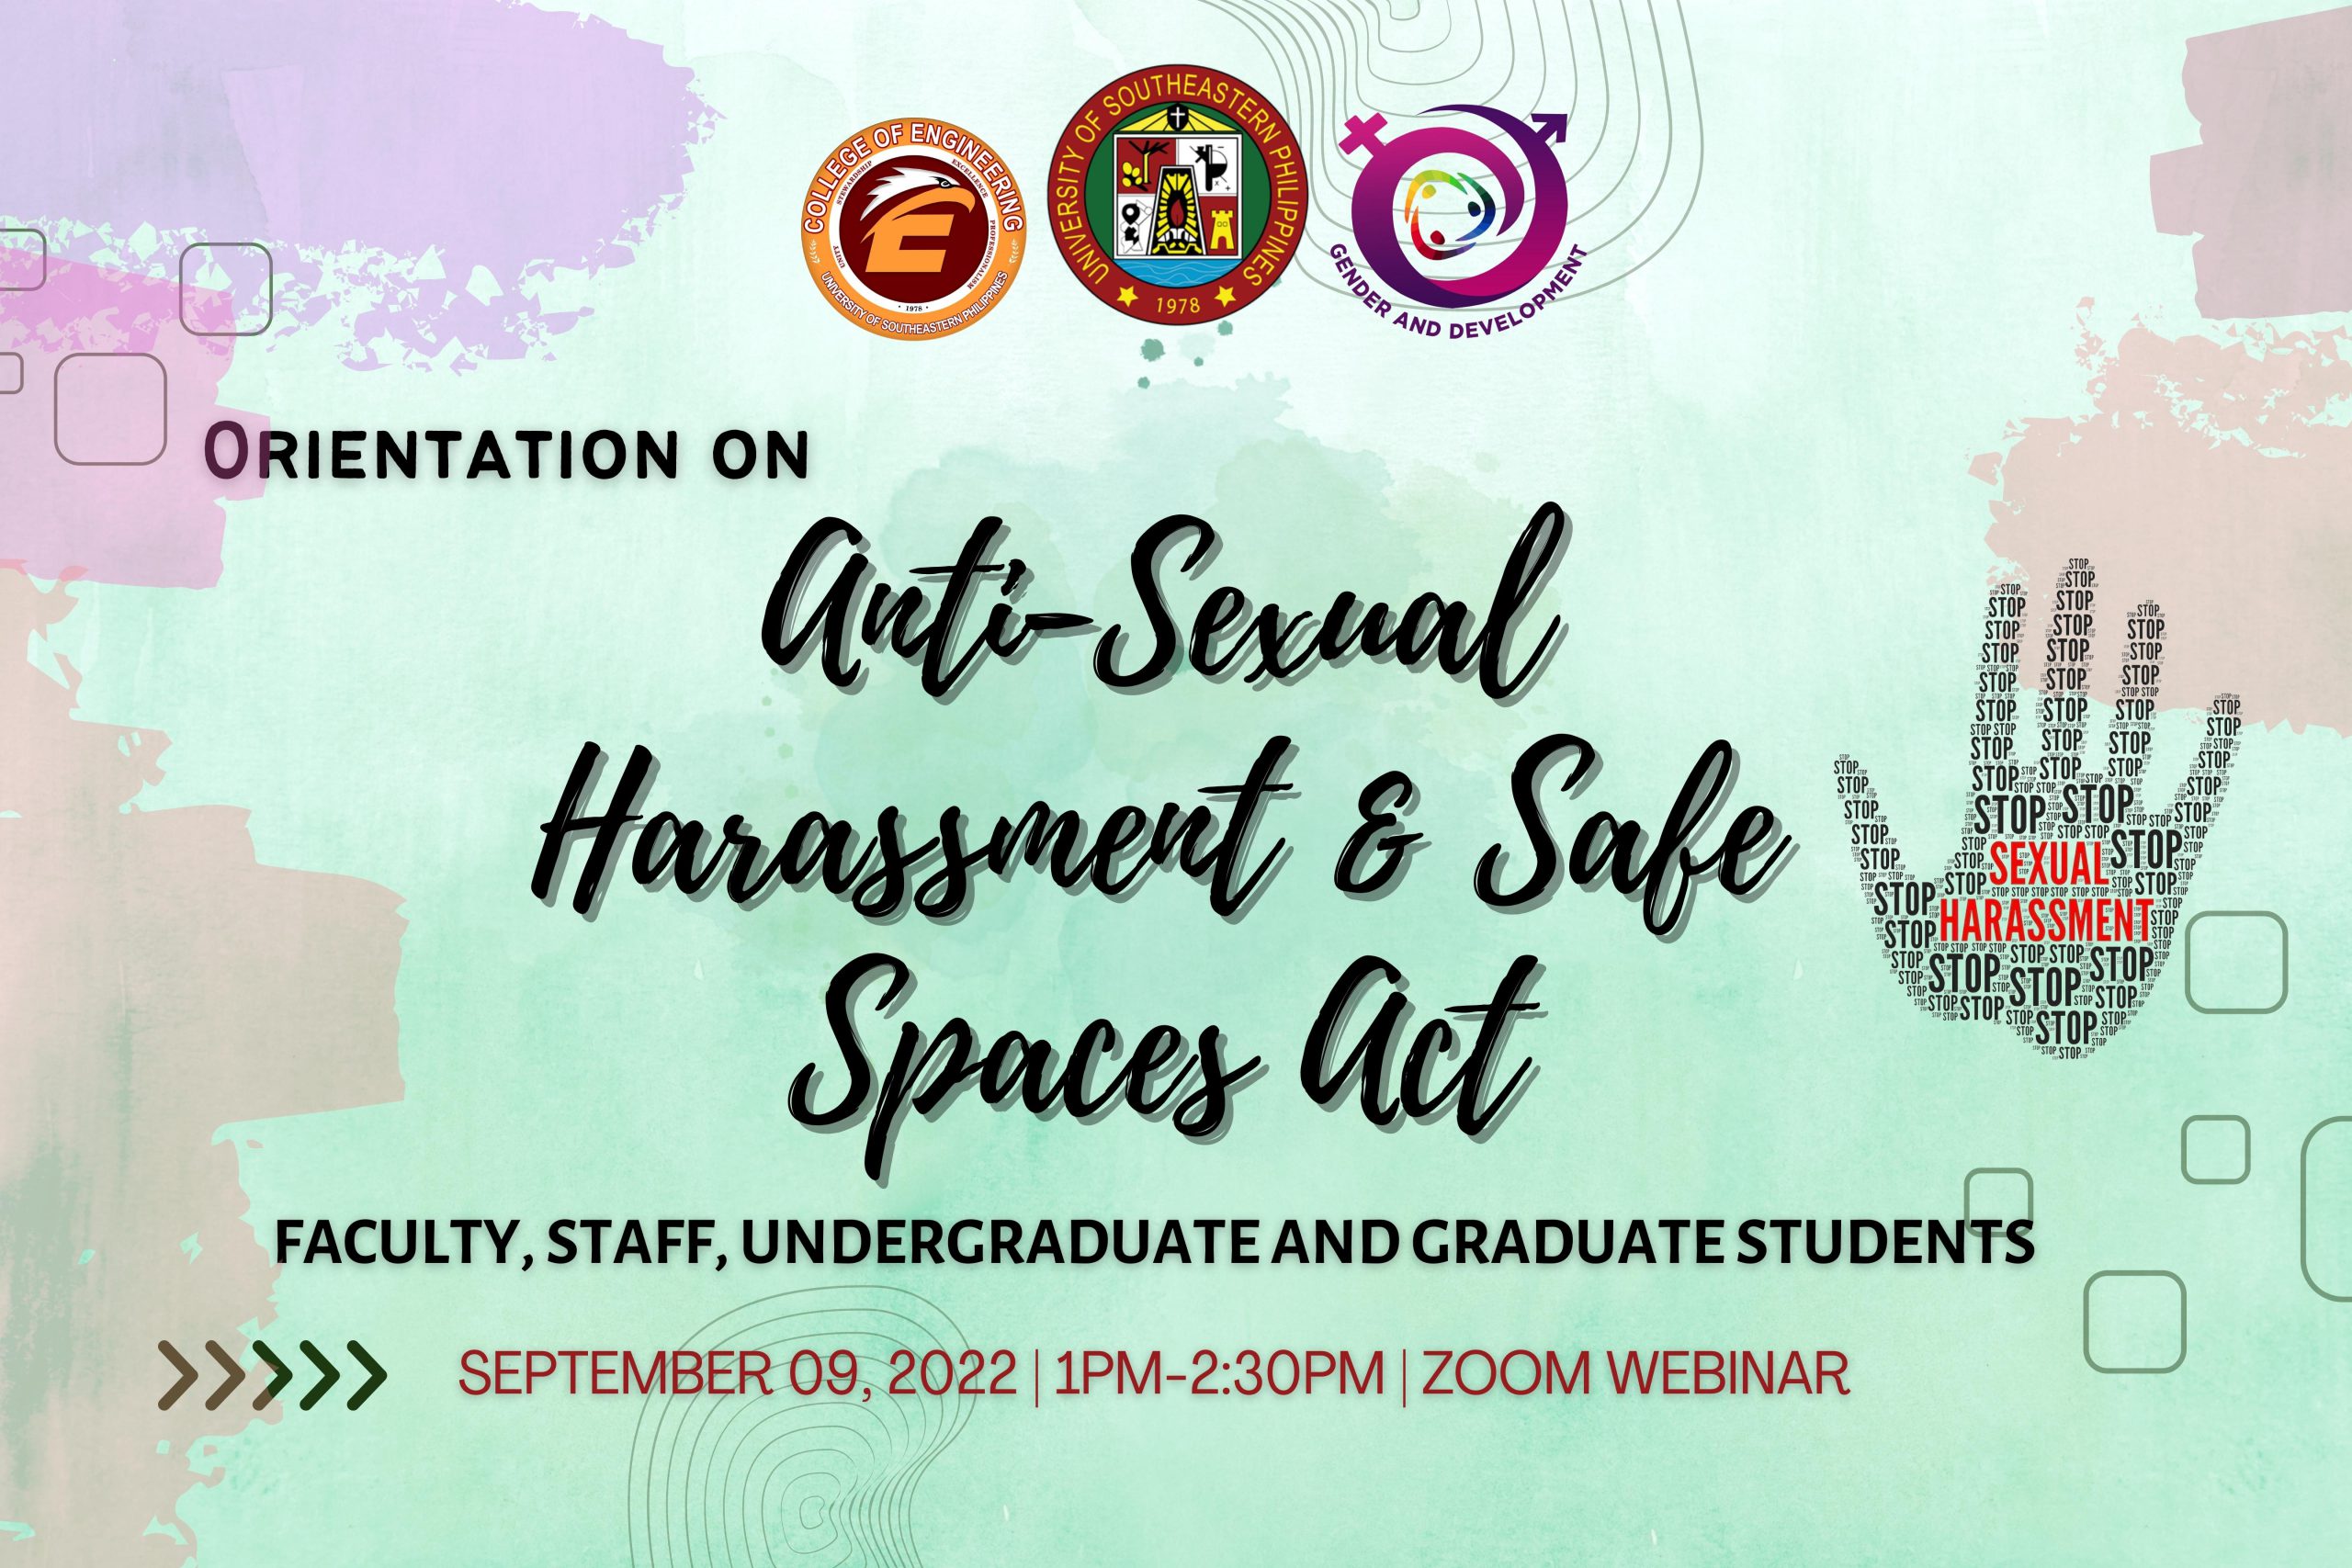 CoE, GAD conduct Orientation on Anti-Sexual Harassment and Safe Spaces Act